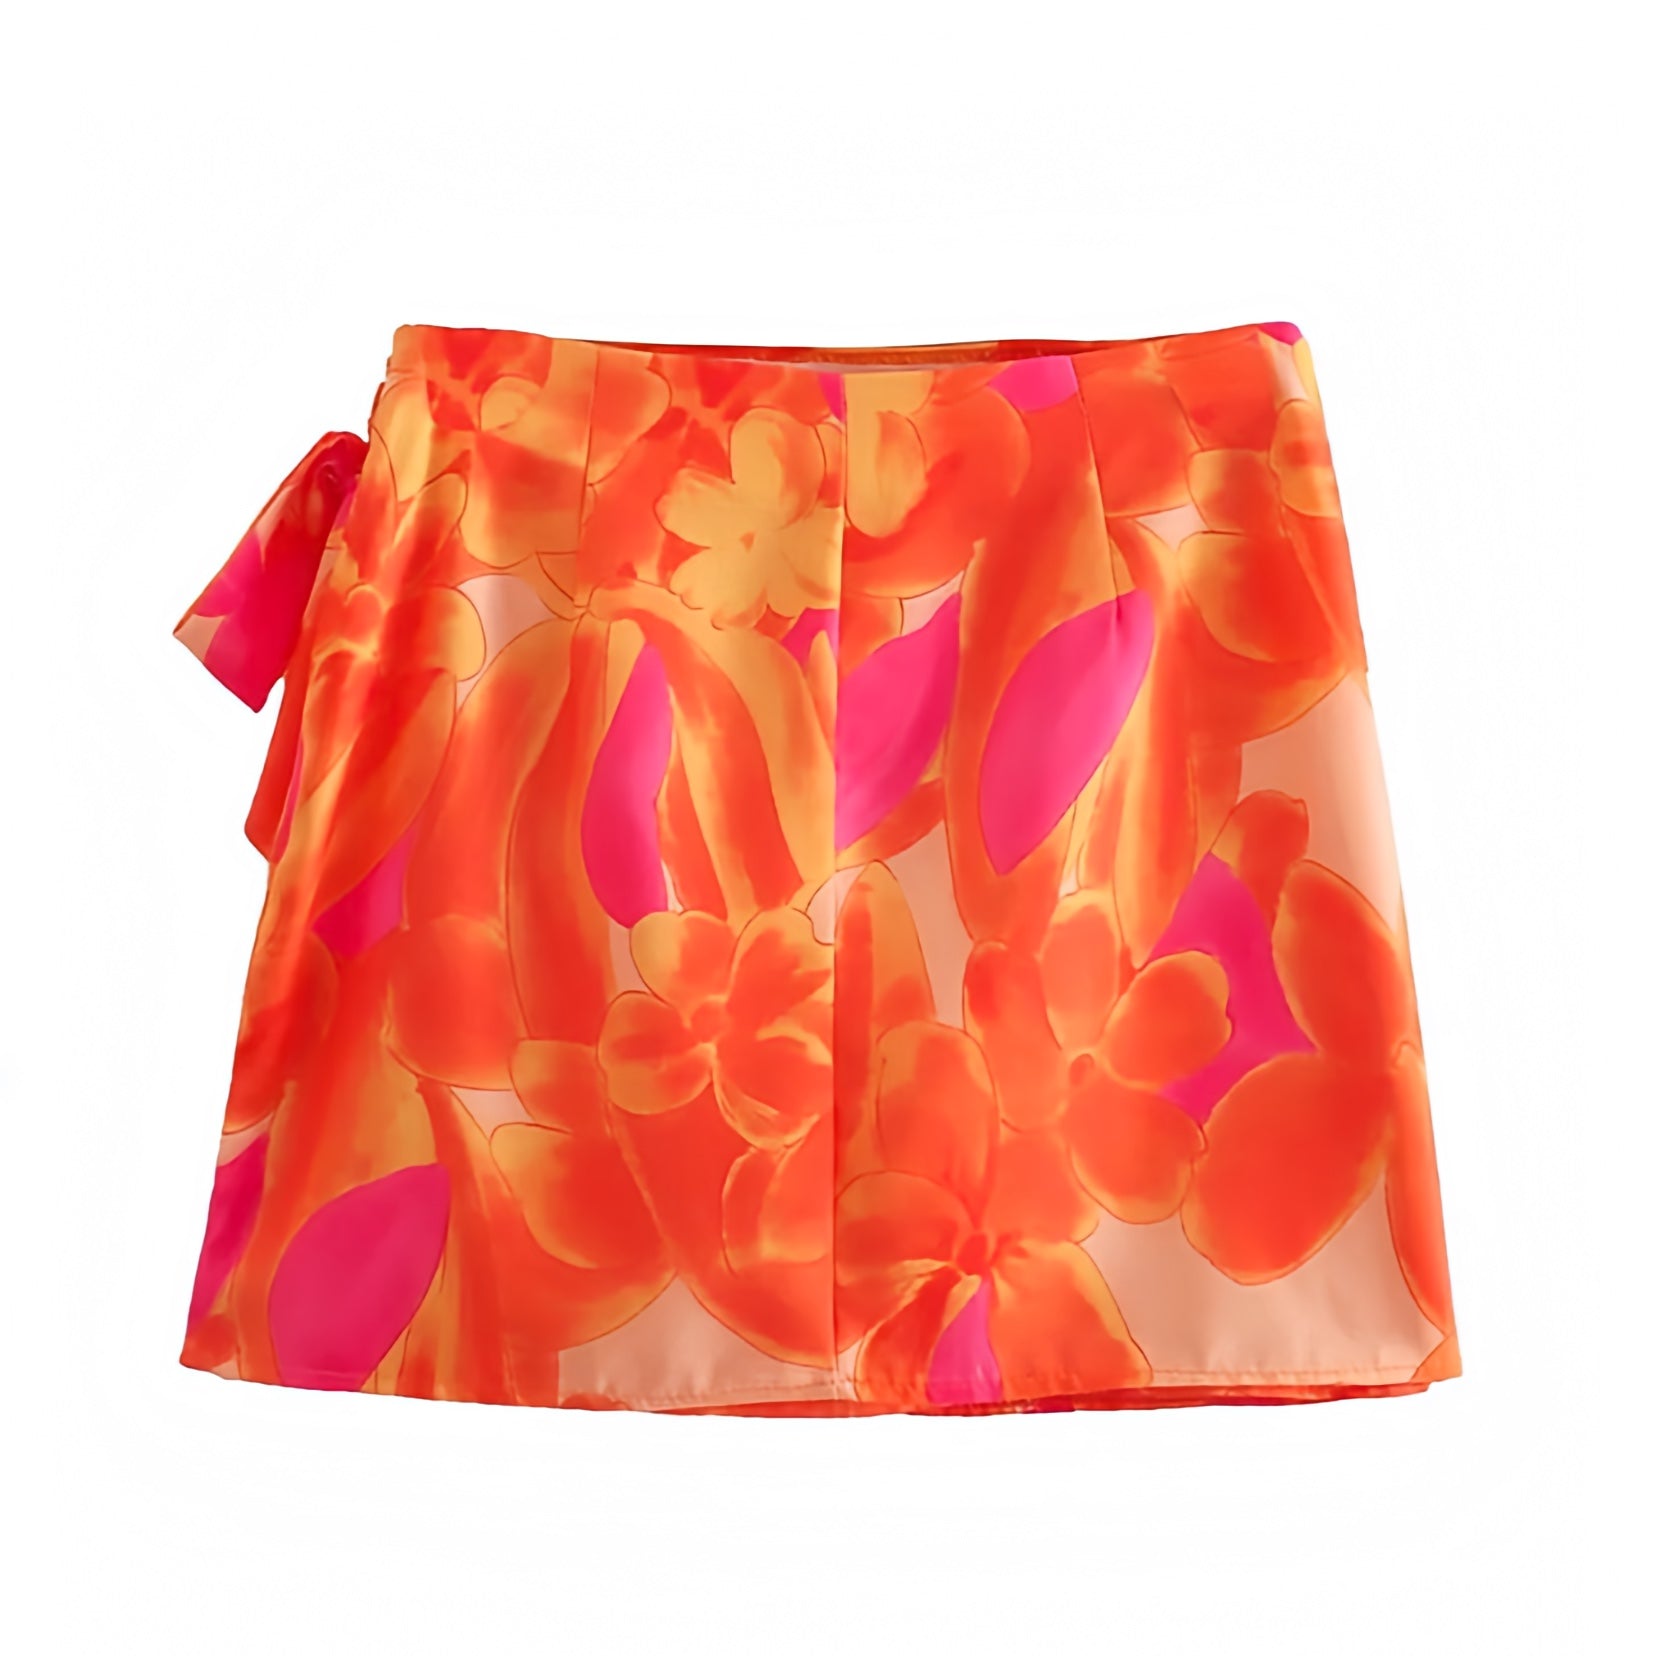 orange-yellow-pink-multi-color-floral-flower-tie-dye-patterned-slim-fit-mid-low-rise-waisted-fitted-waist-ruffled-linen-boho-flowy-knot-tie-mini-skirt-women-ladies-teens-tweens-chic-trendy-spring-2024-summer-elegant-casual-feminine-preppy-style-cocktail-party-club-sexy-night-out-tropical-exotic-hawaiian-vacation-beach-wear-zara-aritzia-revolve-urban-outfitters-whitefox-princess-polly-edikted-dupe